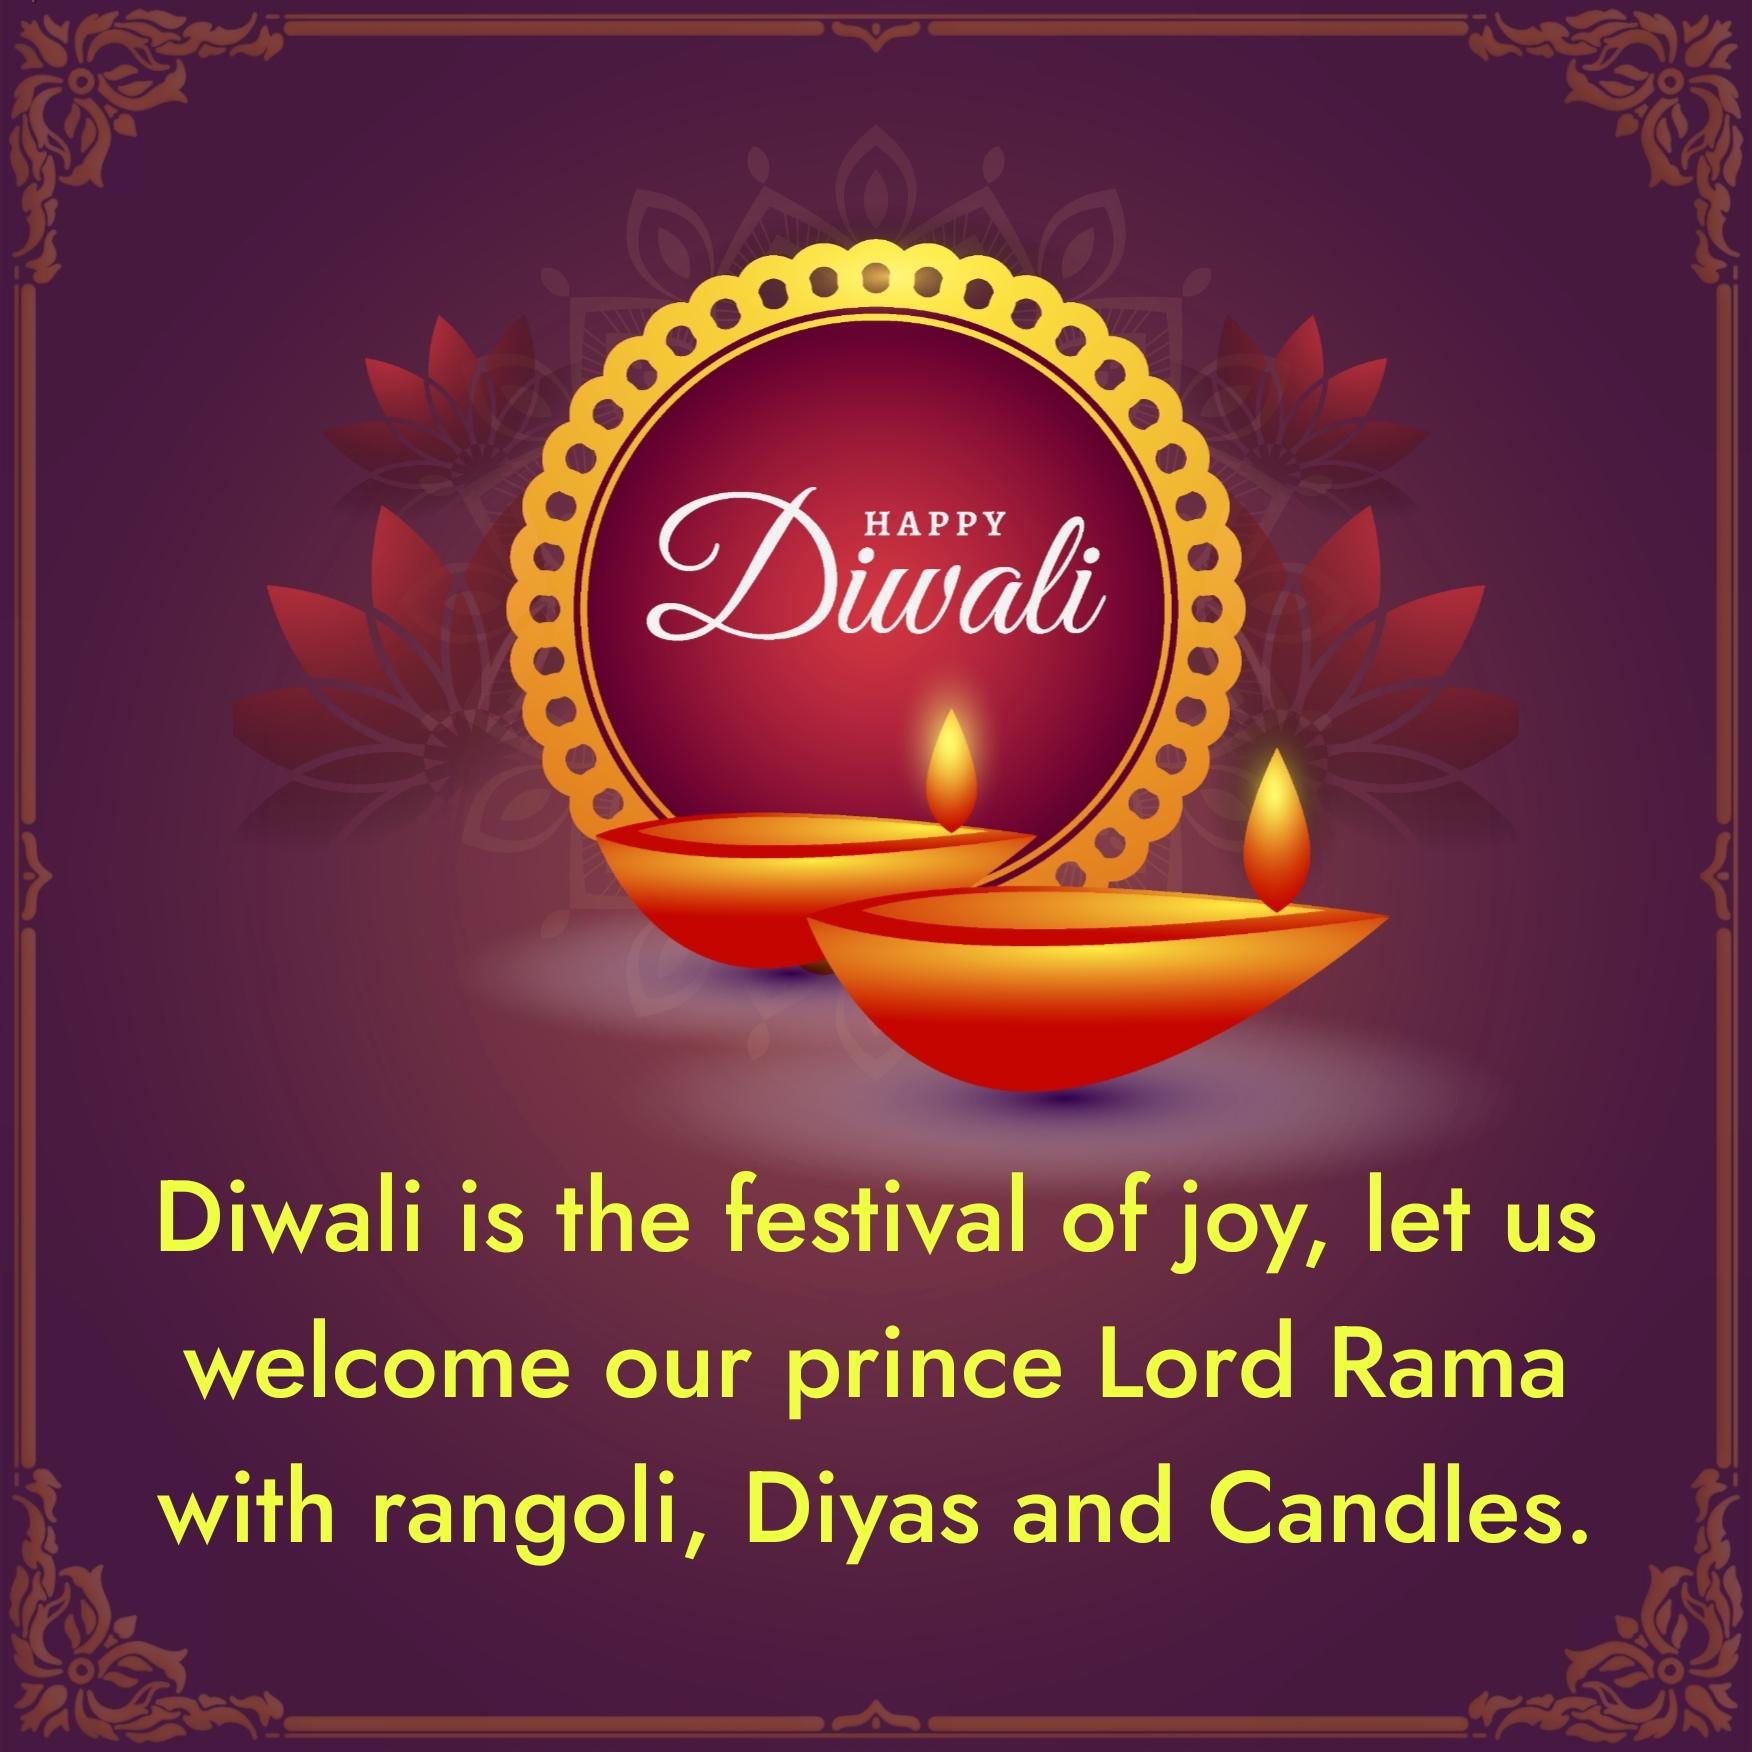 Diwali is the festival of joy let us welcome our prince Lord Rama